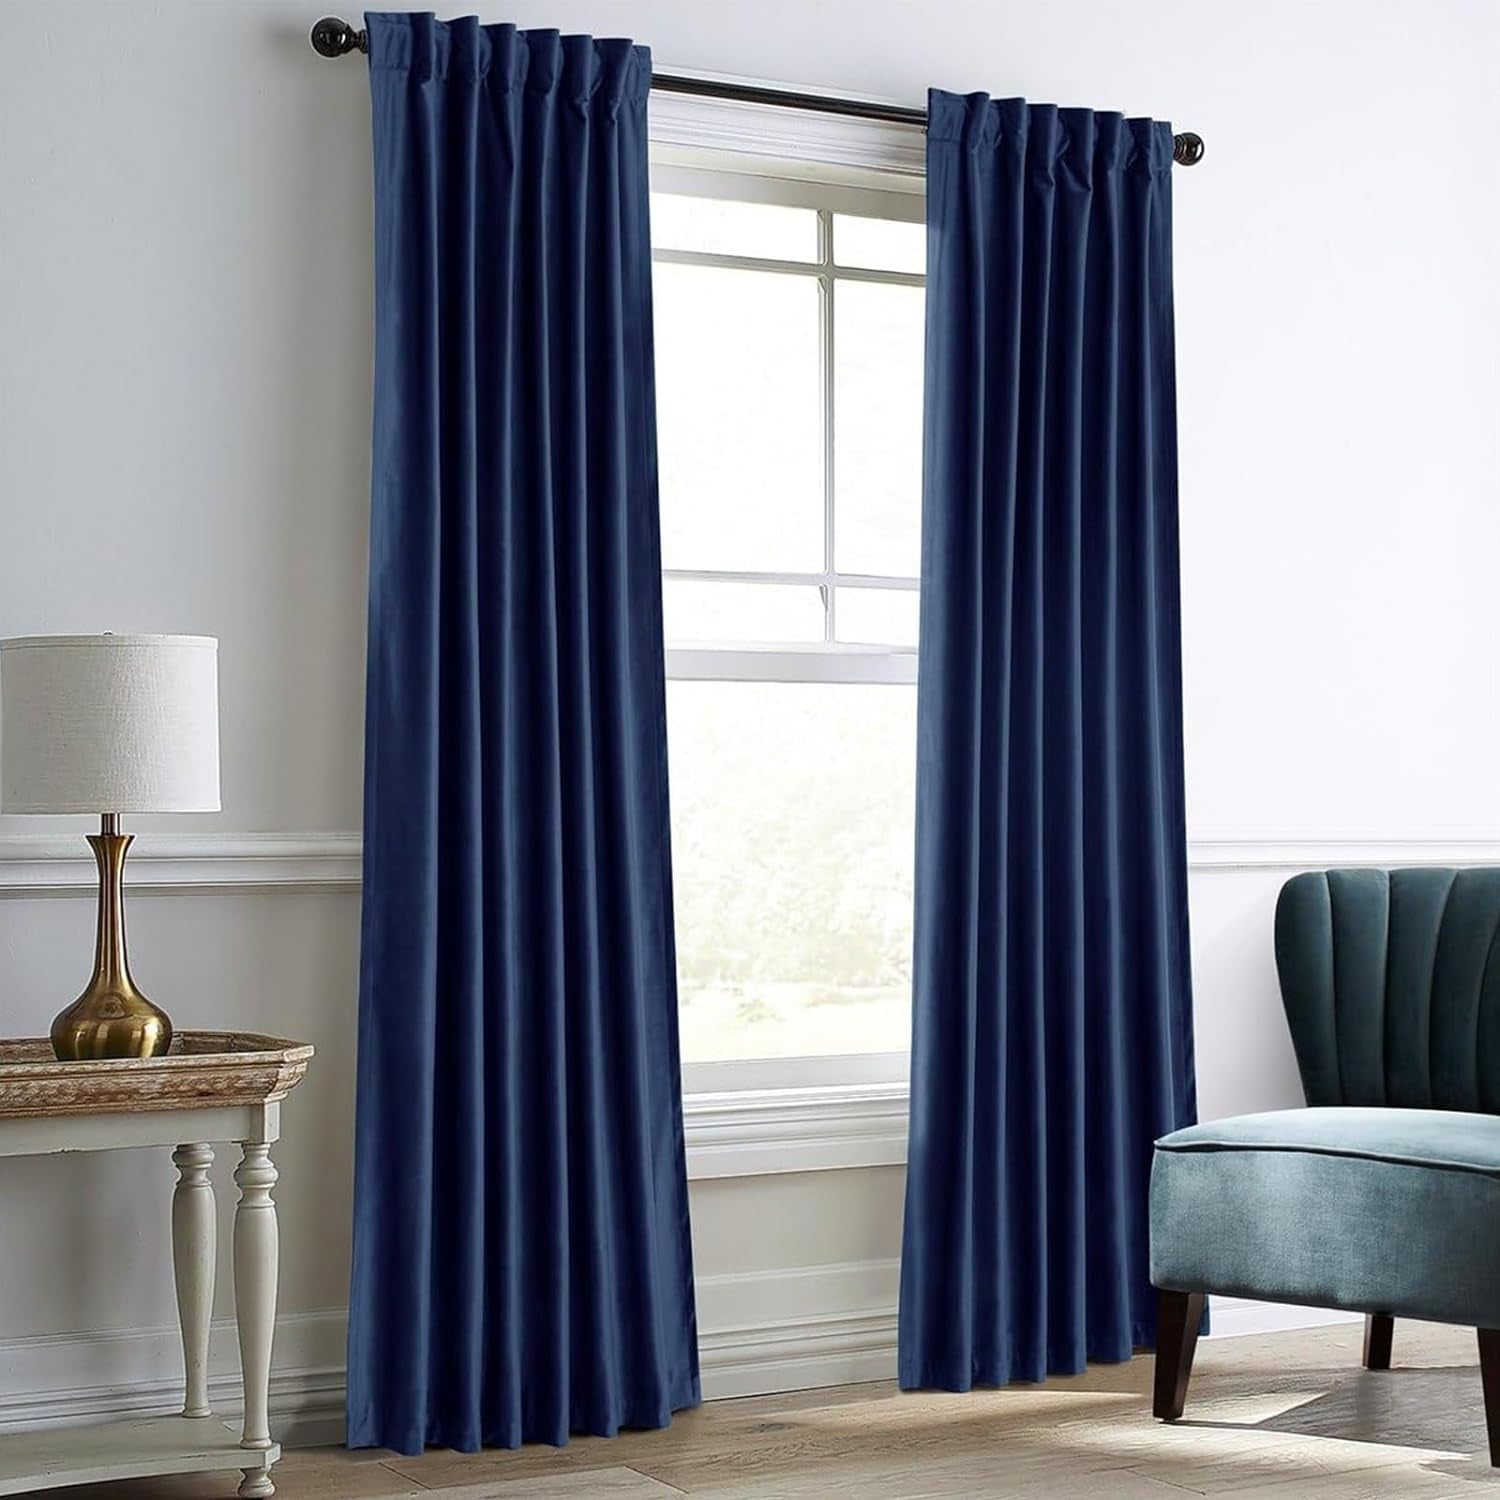 Dreaming Casa Royal Blue Velvet Room Darkening Curtains for Living Room Thermal Insulated Rod Pocket Back Tab Window Curtain for Bedroom 2 Panels 102 Inches Long, 42" W X 102" L  Dreaming Casa   